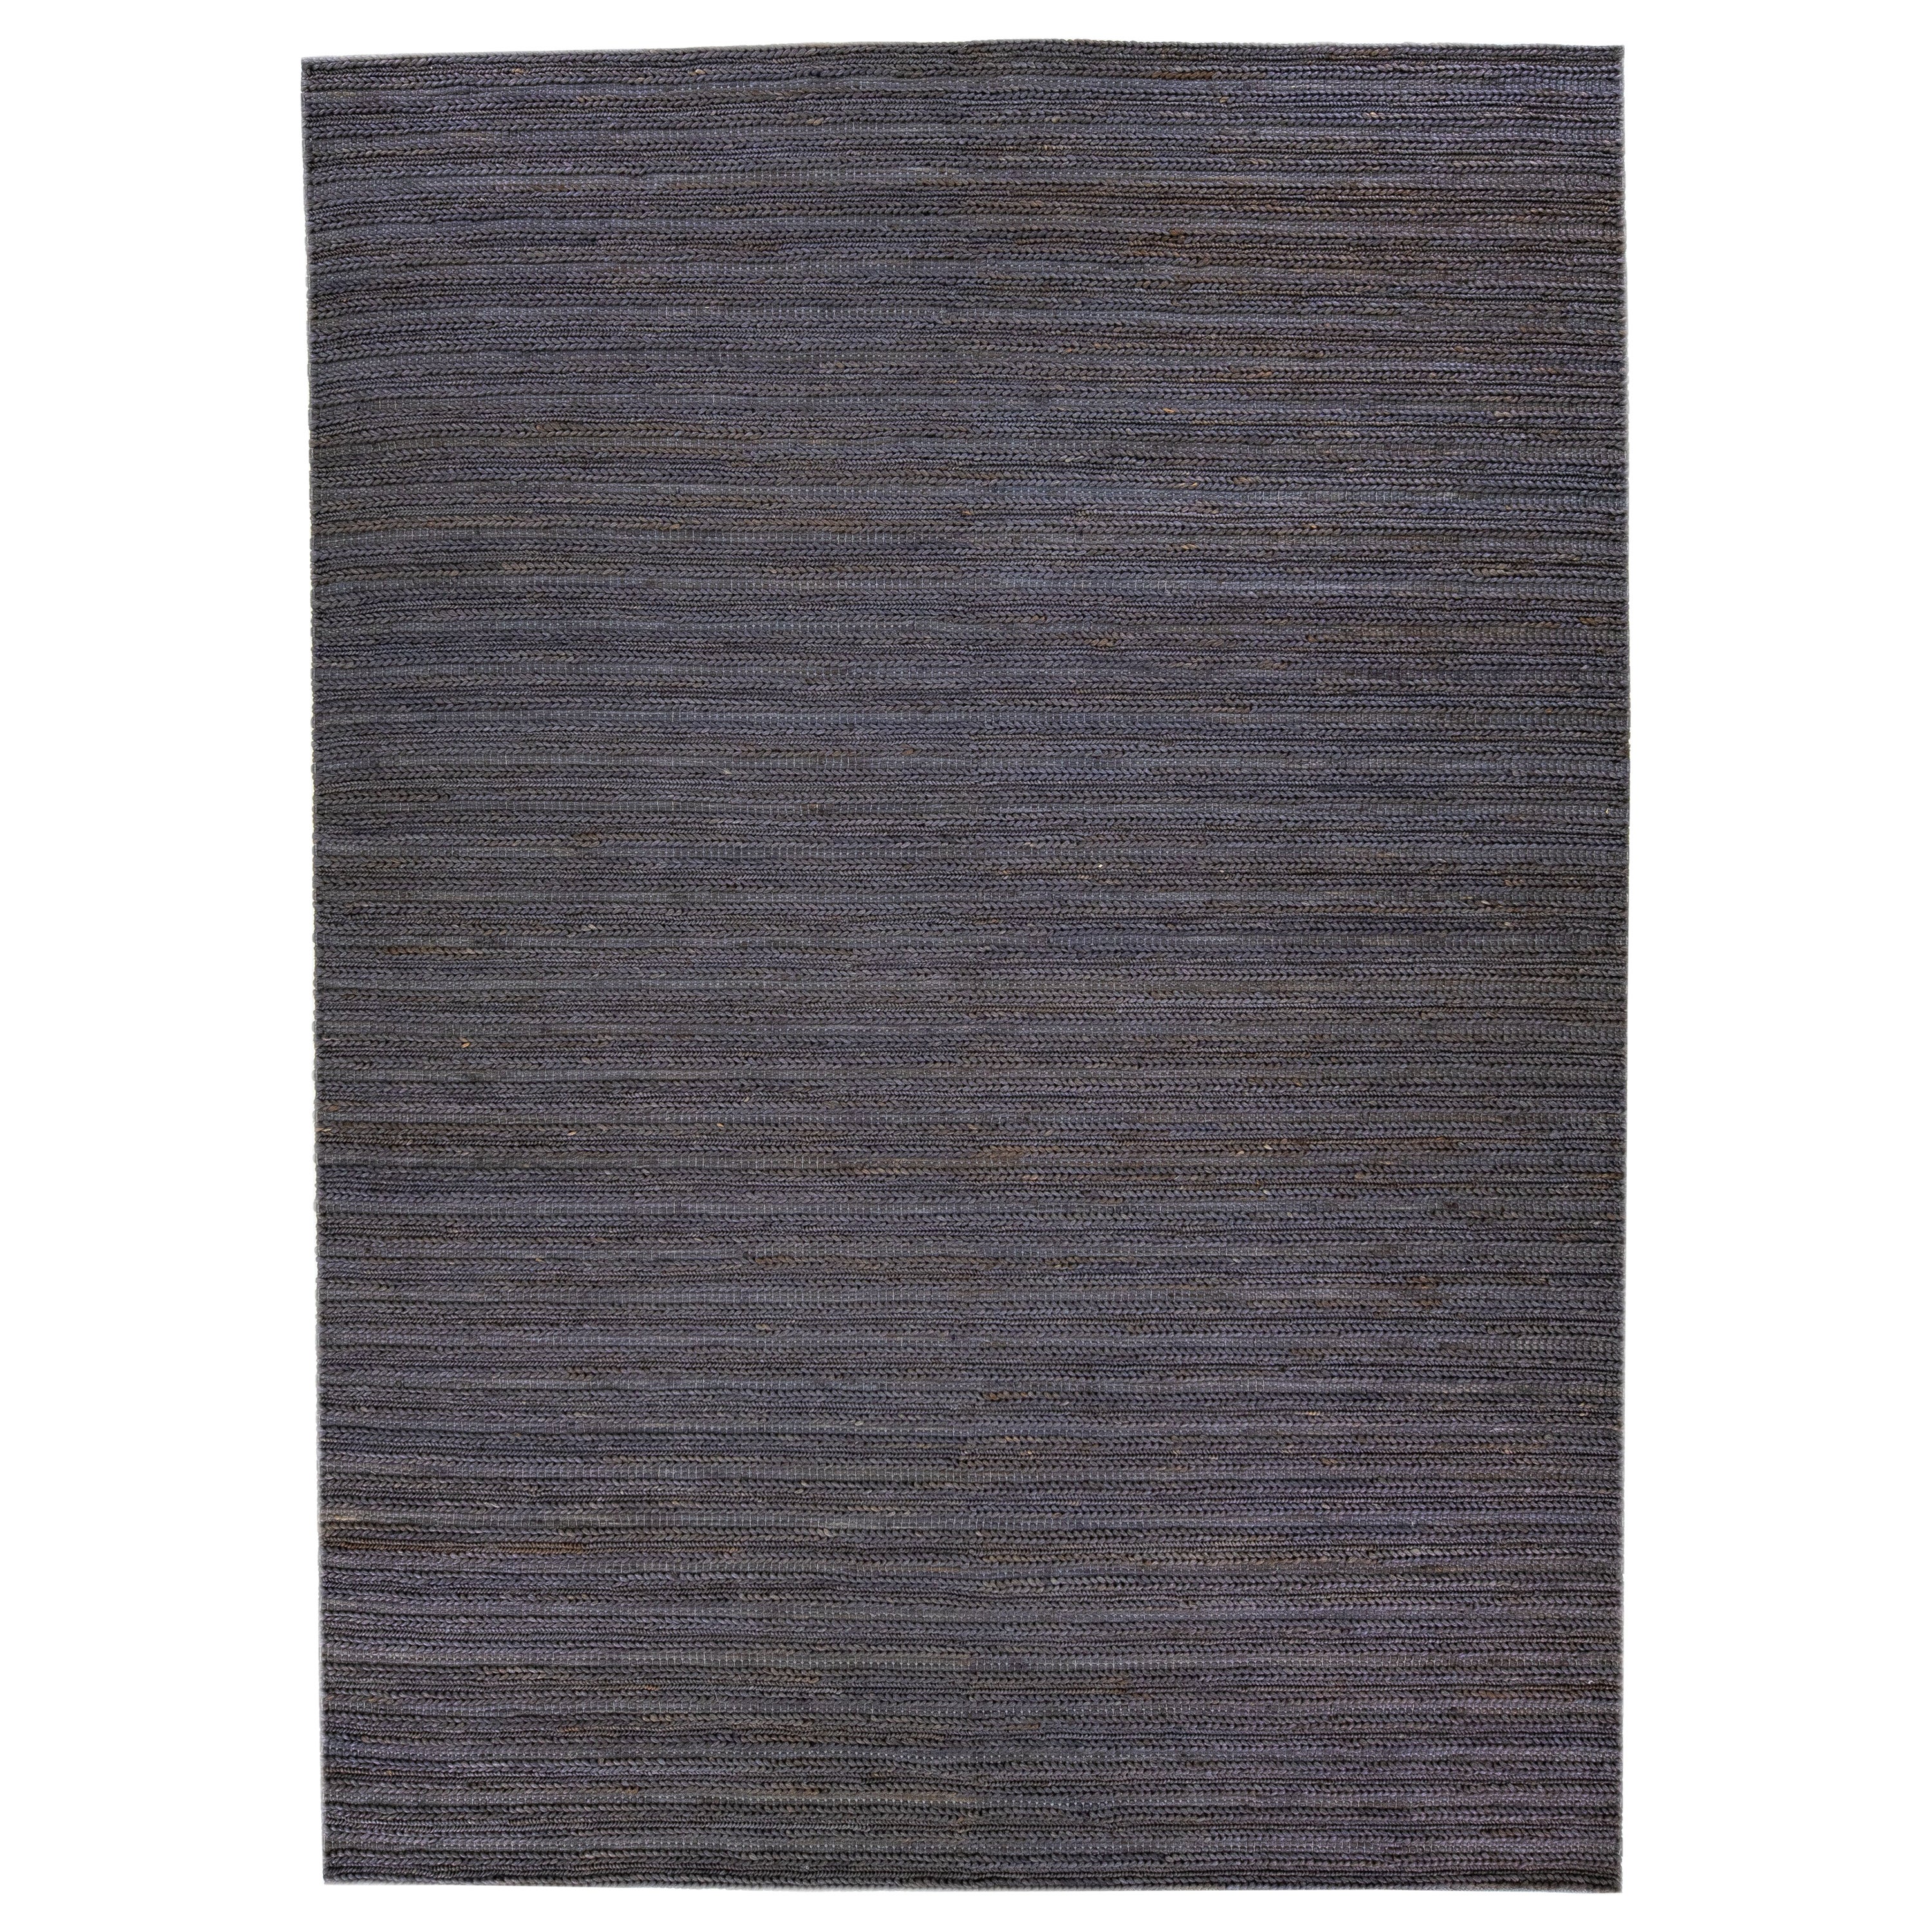 Modern Natural Texture Hand Woven Jute & Cotton Area Rug with Grey-Onyx Color